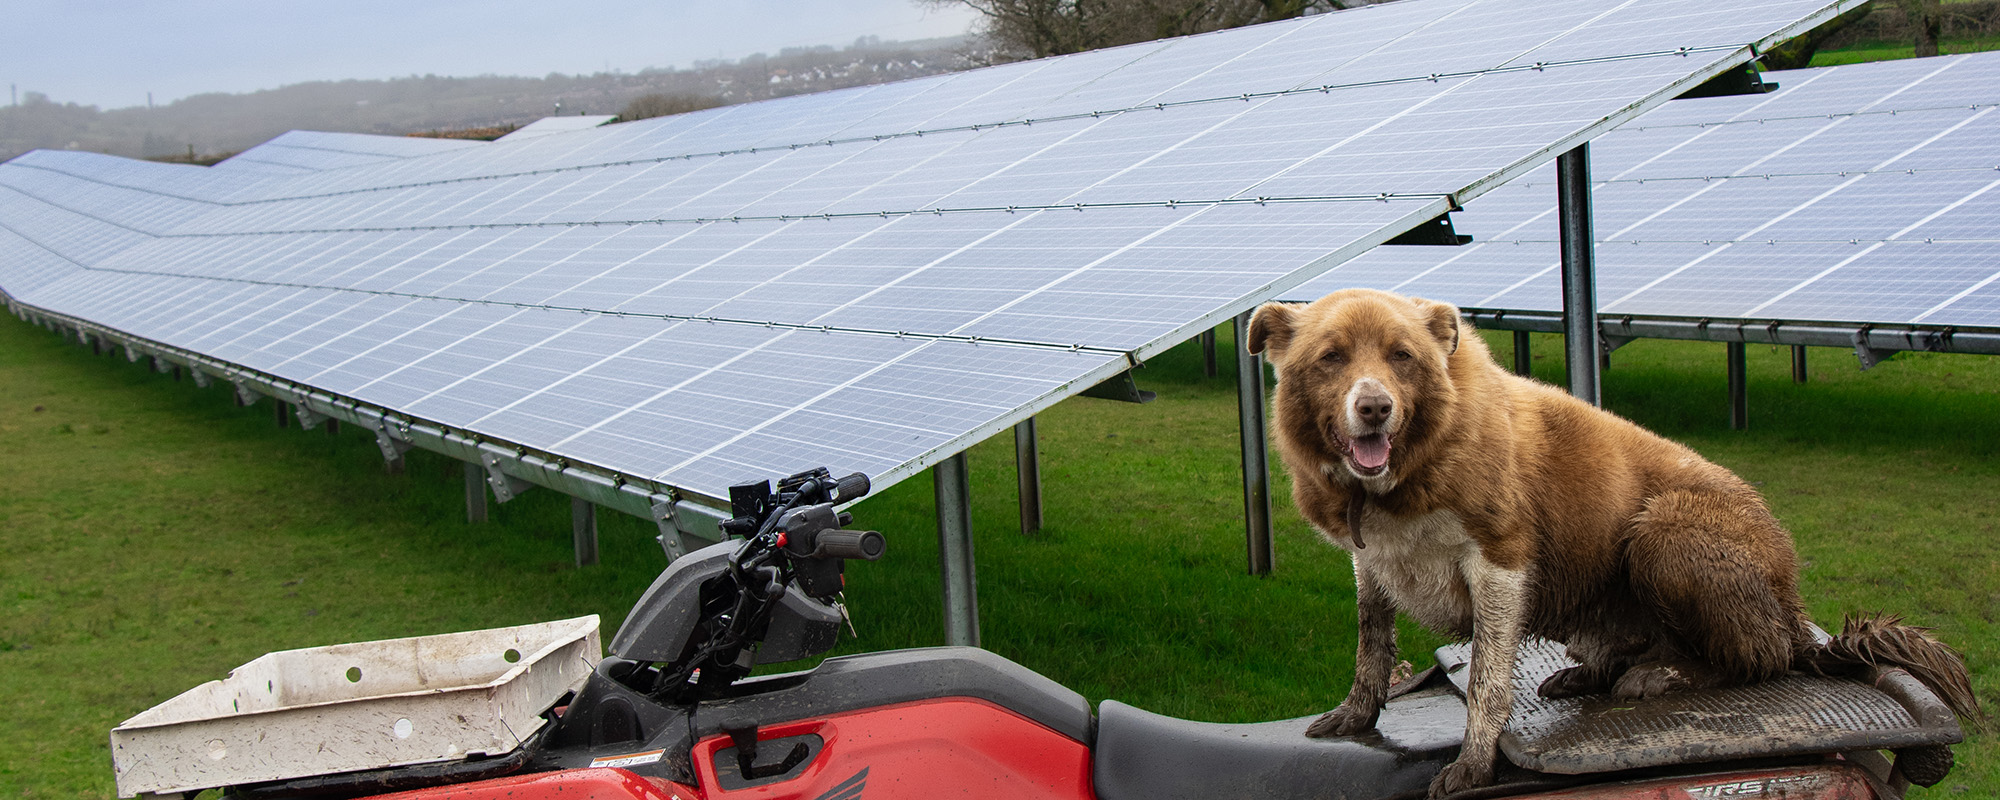 Joe the sheepdogs sat on  the back of a quadbike in front of solar panels on the farm